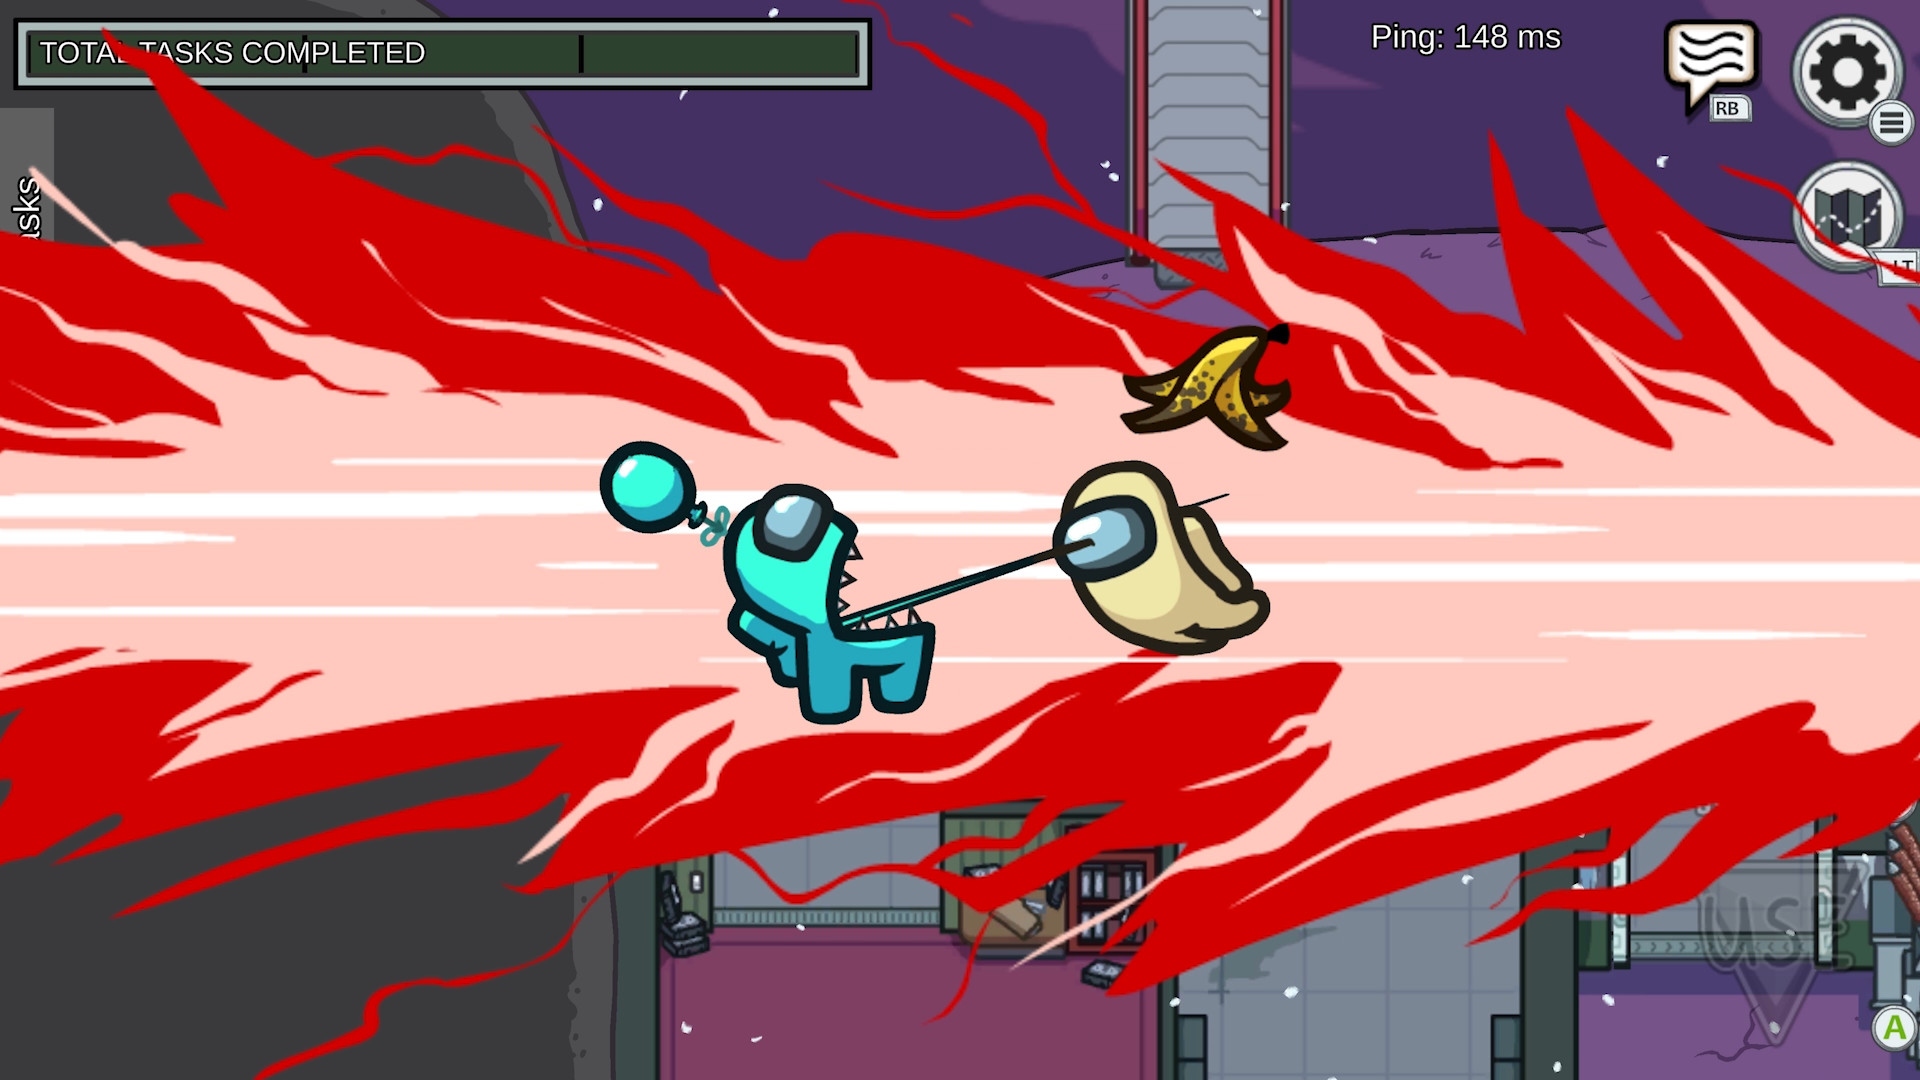 Best cross-platform games: Among Us. Image shows a crewmate being killed by an alien imposter.